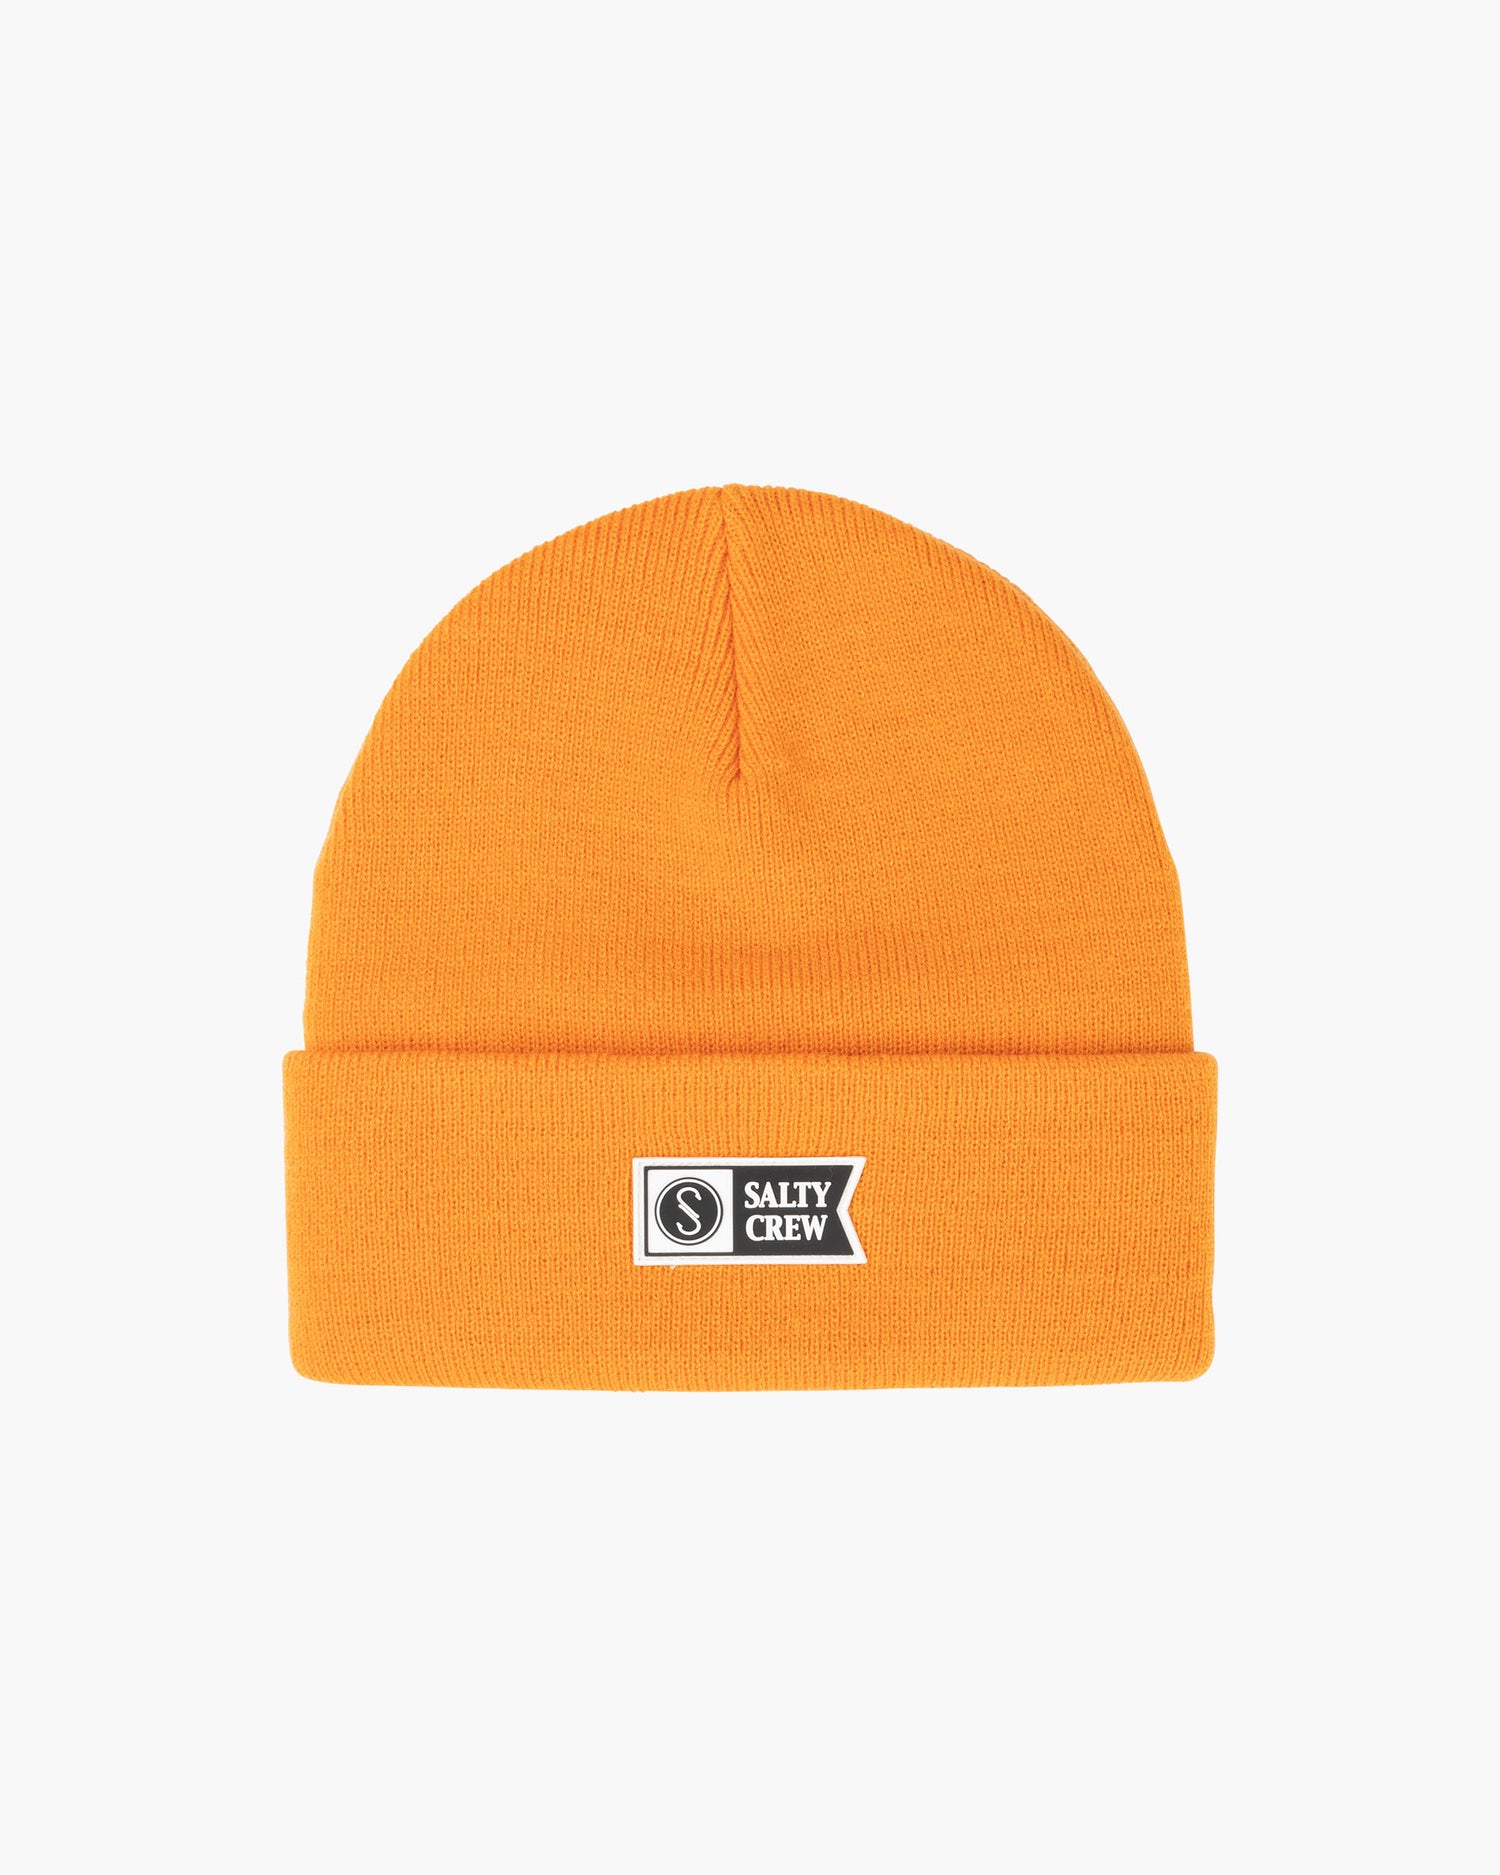 COLD FRONT BEANIE - Offshore Orange